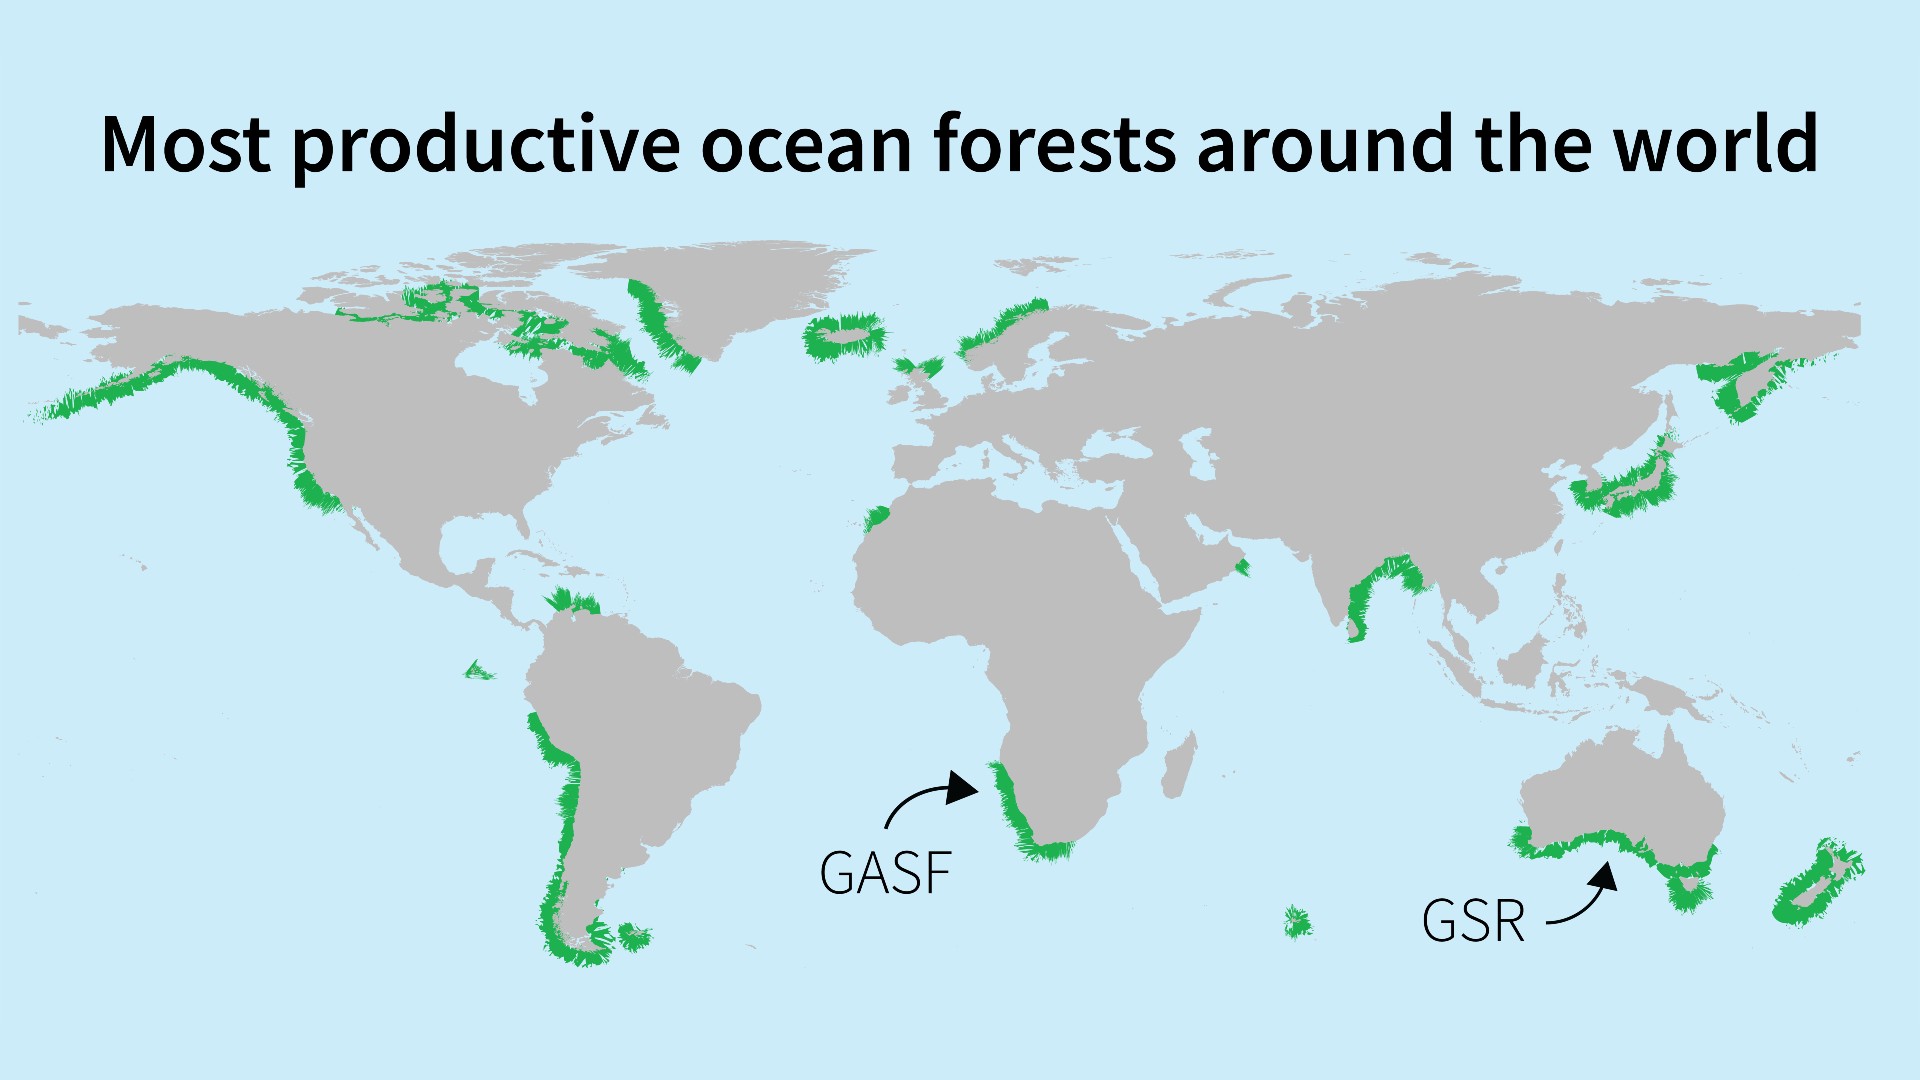 Most productive ocean forests around the world.